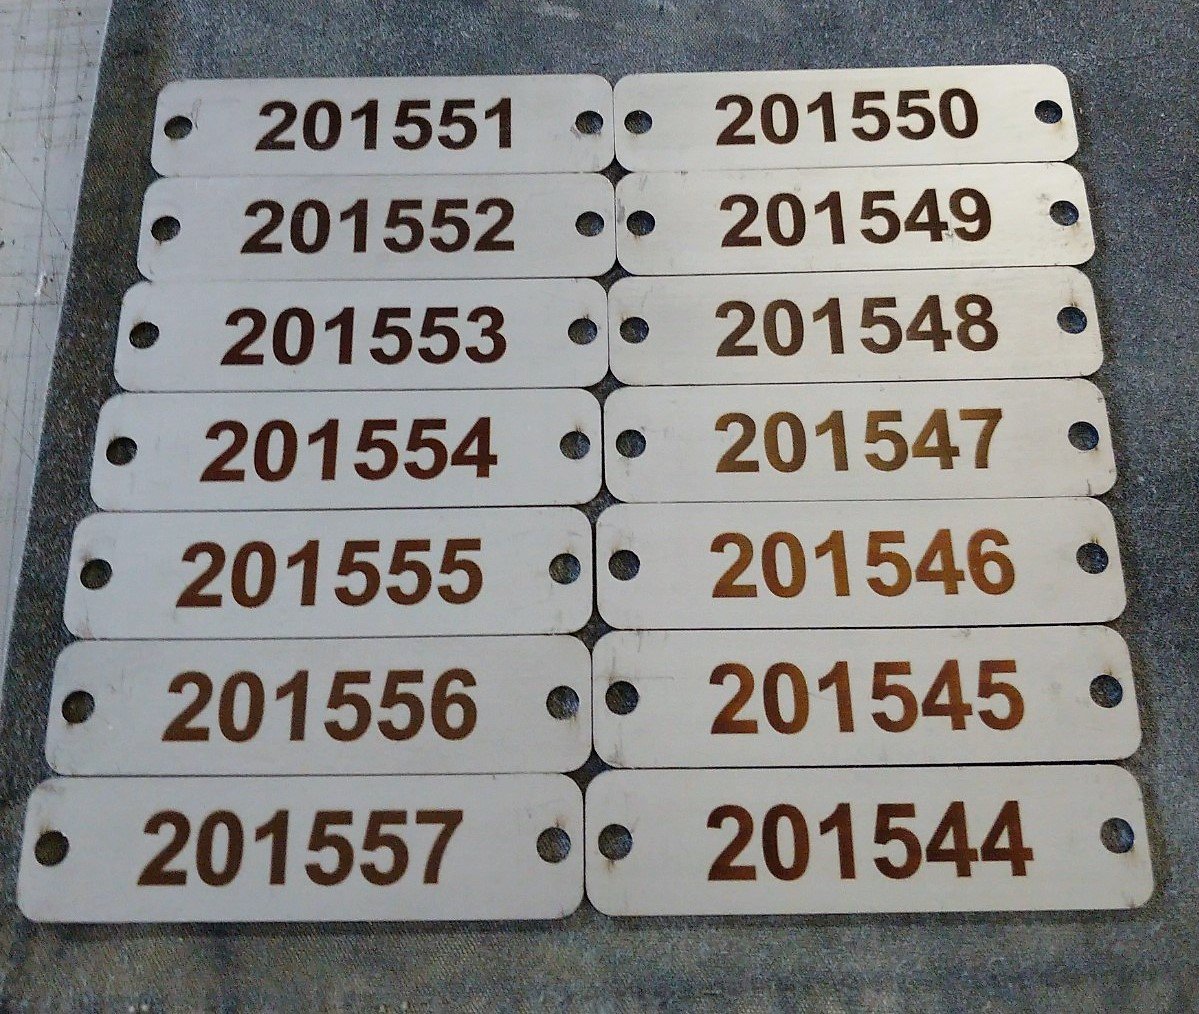 Laser etching on stainless steel - serial numbers